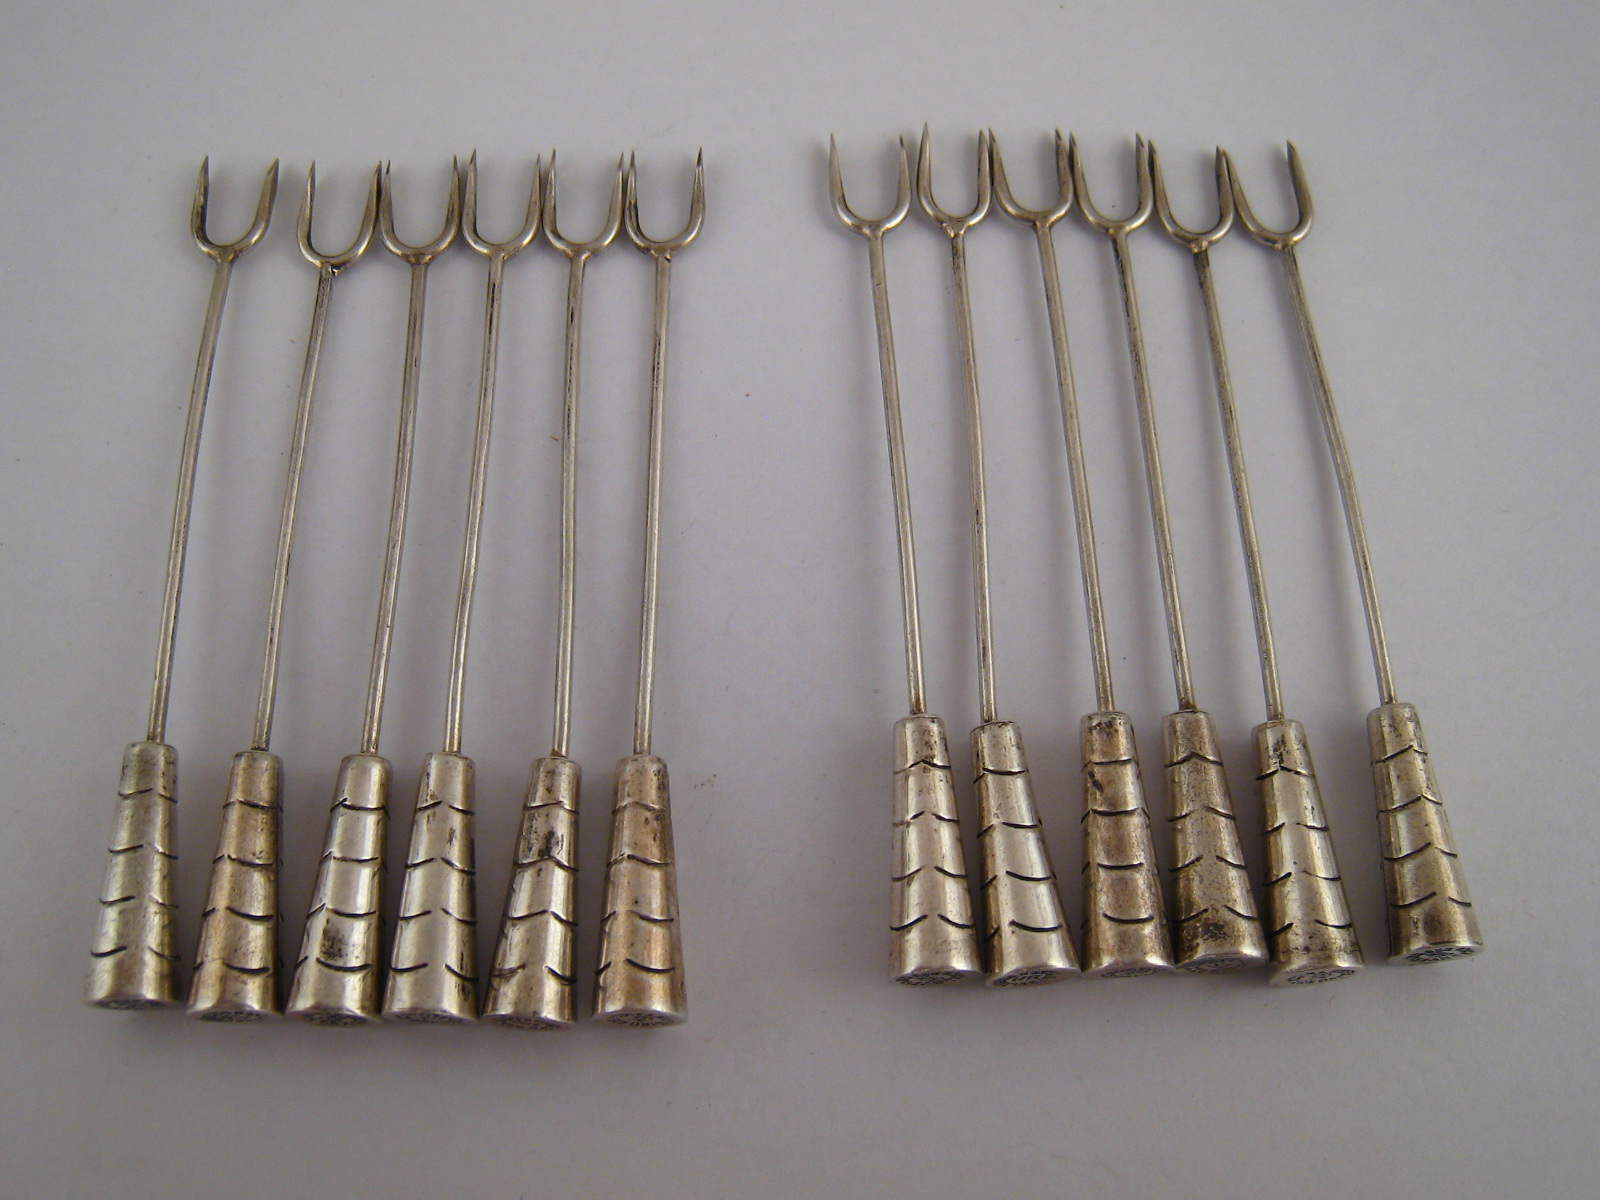 A set of twelve silver snail forks with Art deco handles.